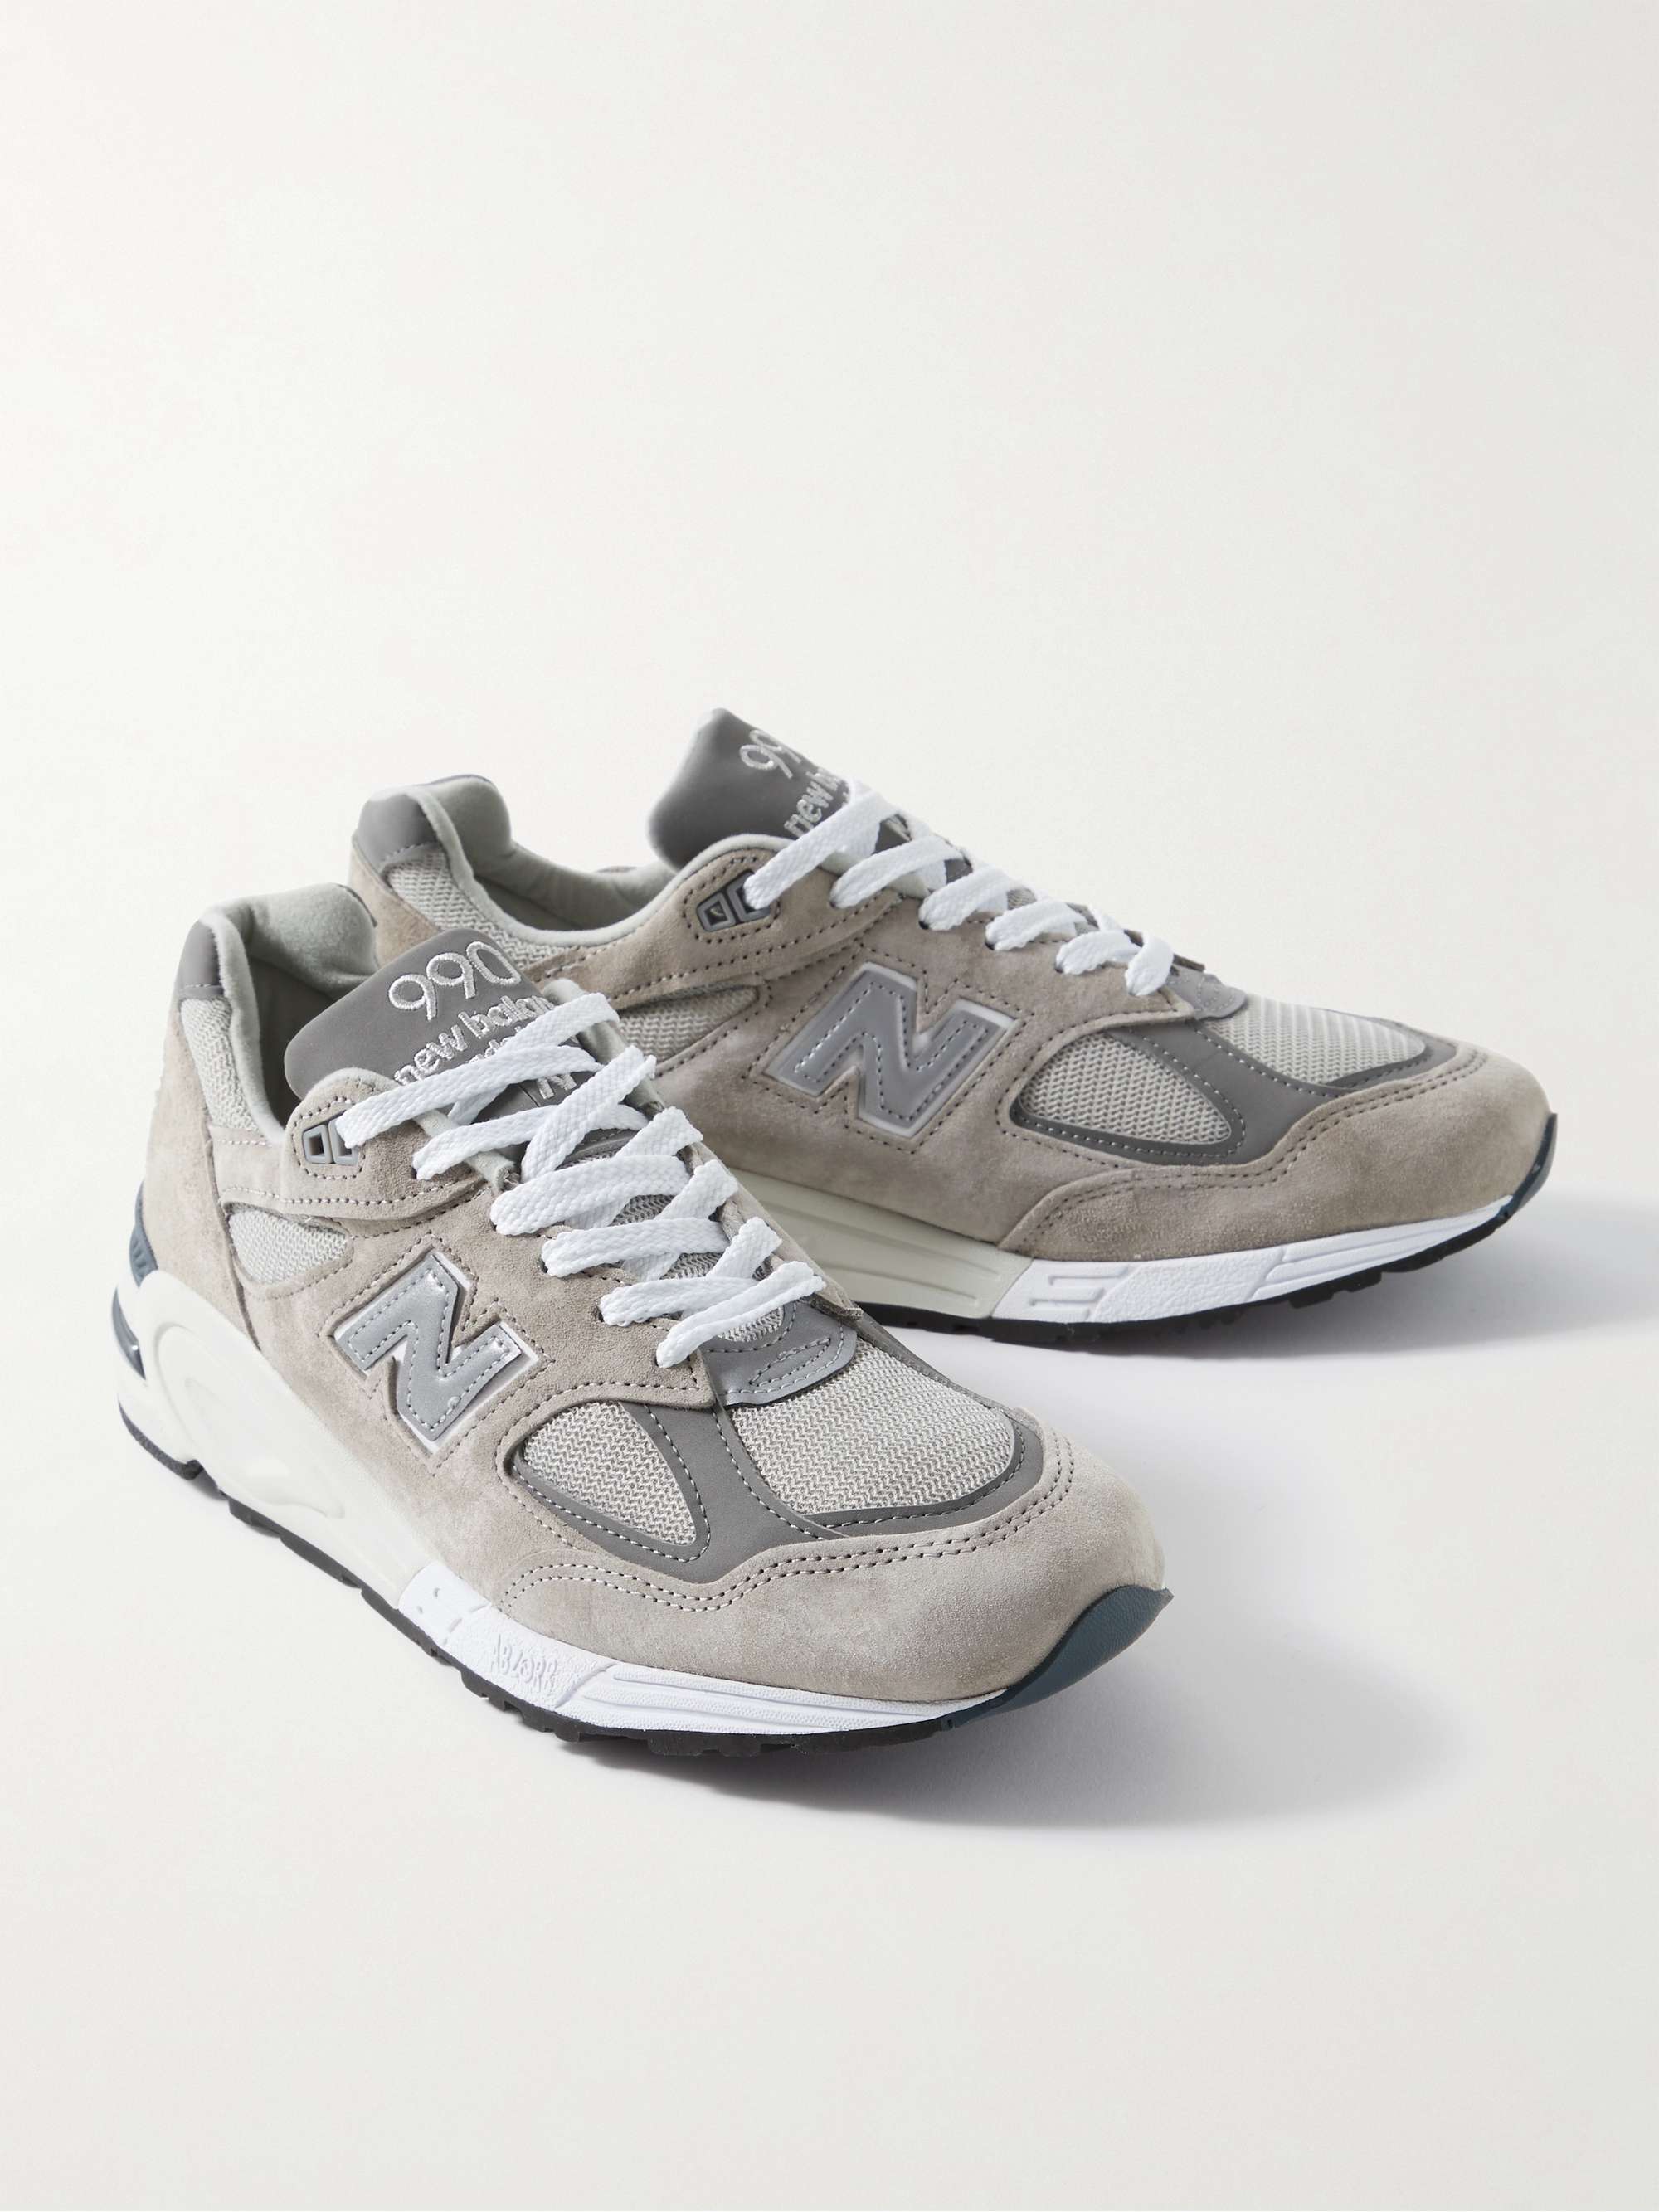 NEW BALANCE M990v2 Suede and Mesh Sneakers | MR PORTER